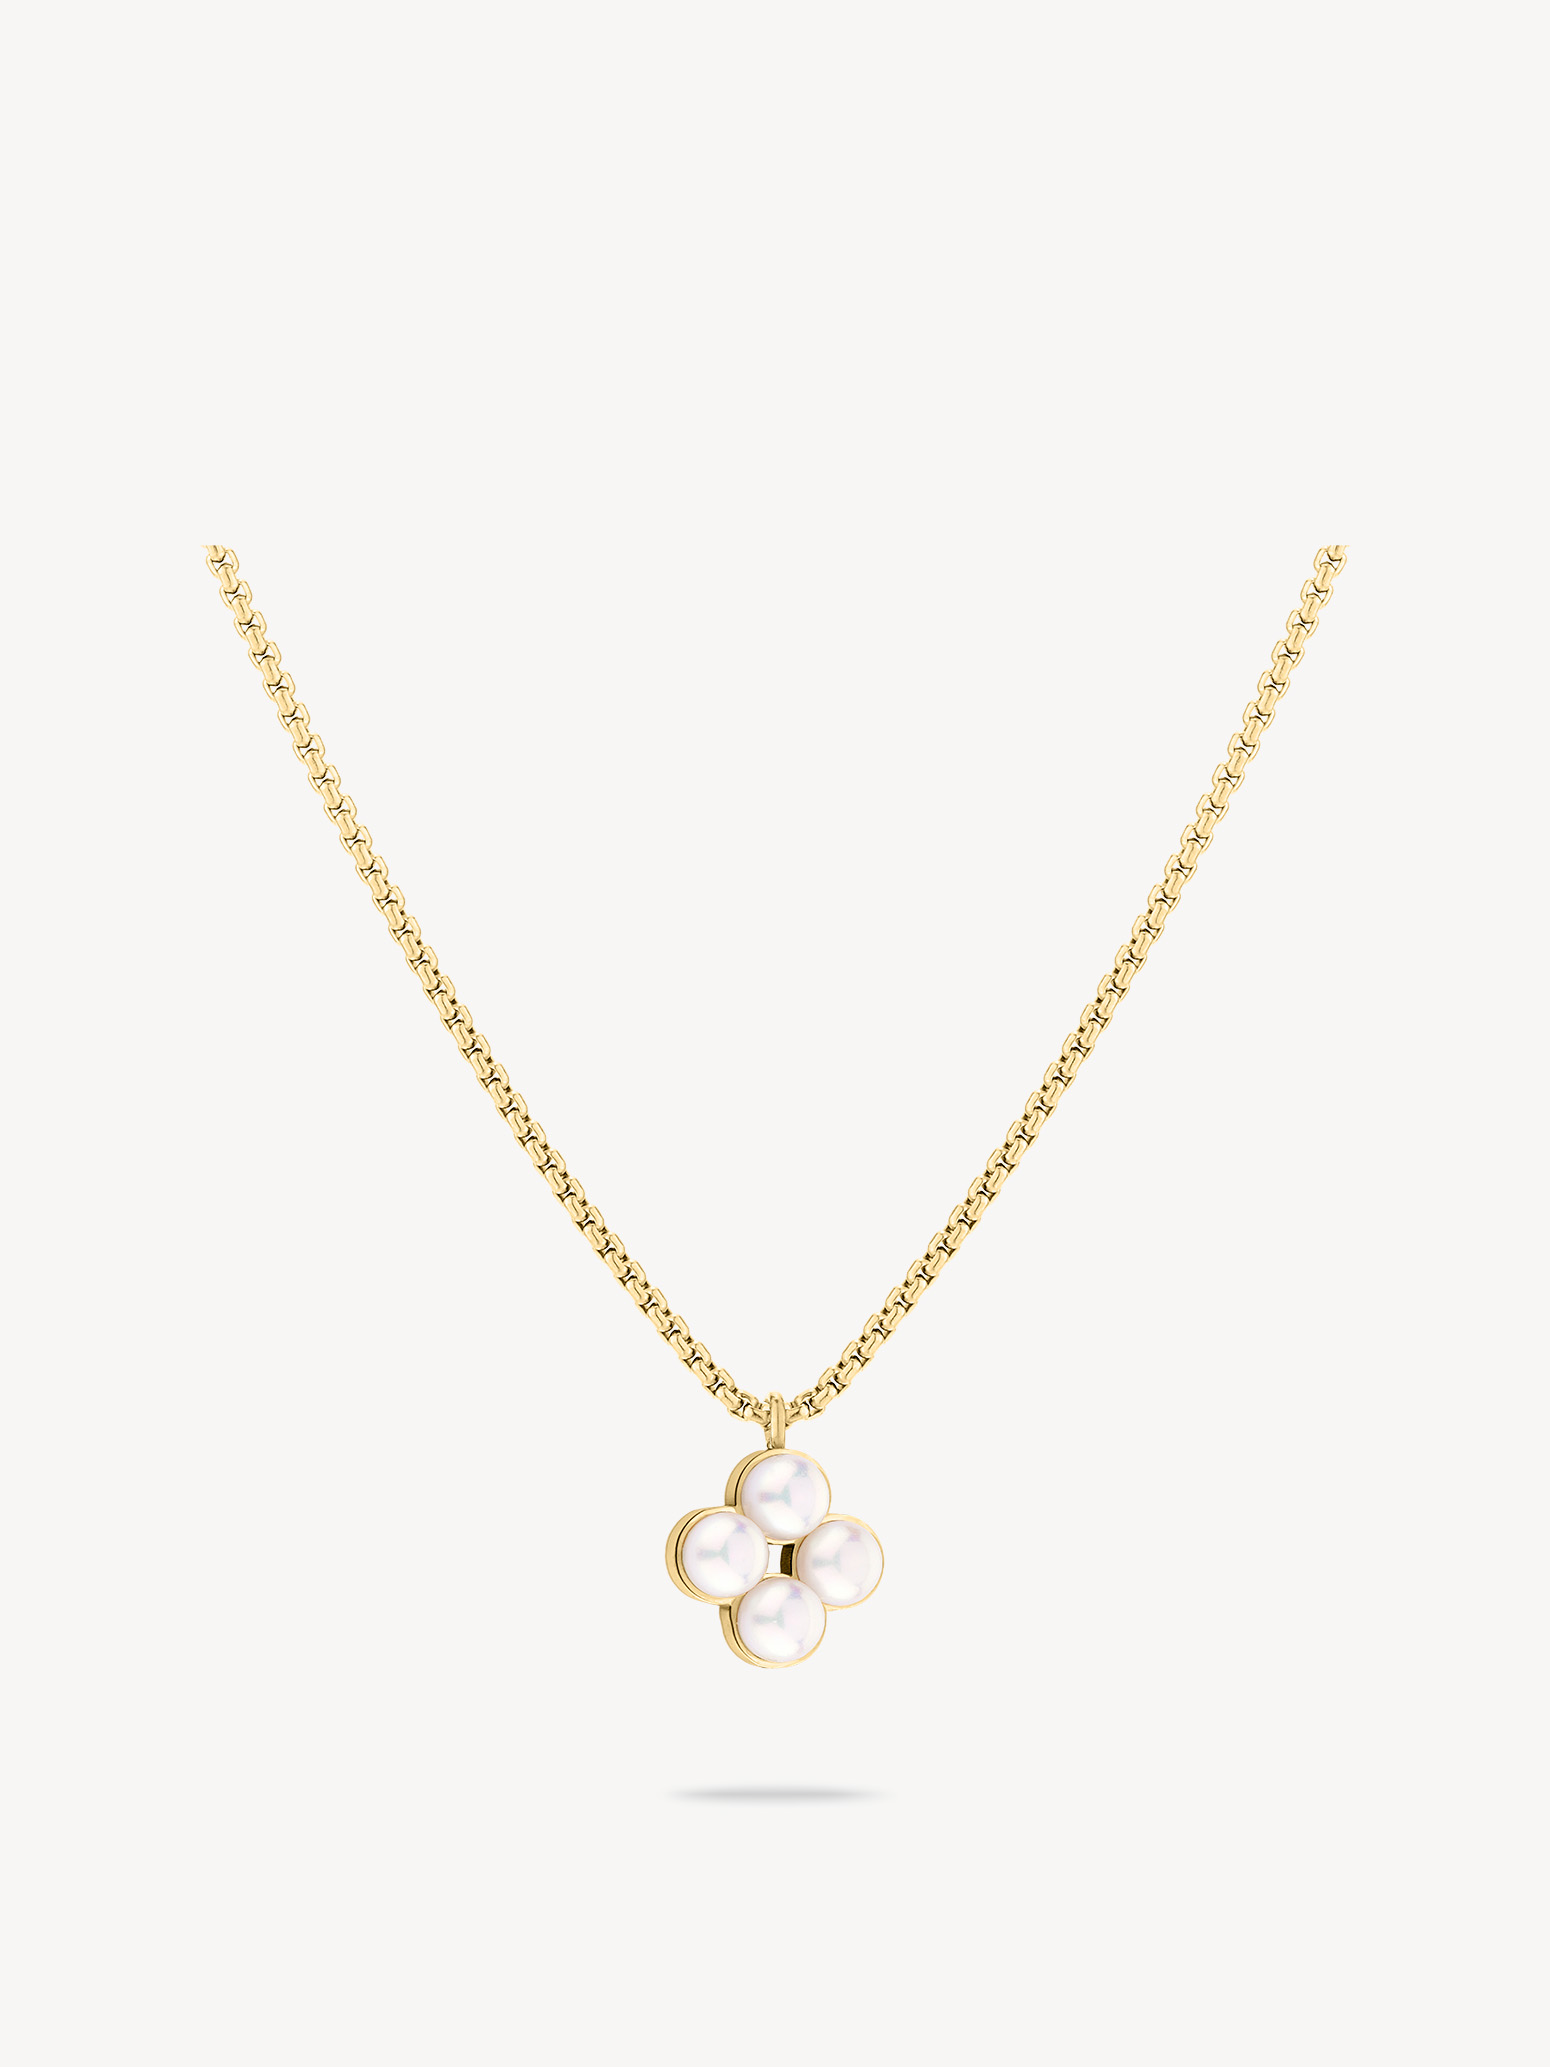 Necklace - gold